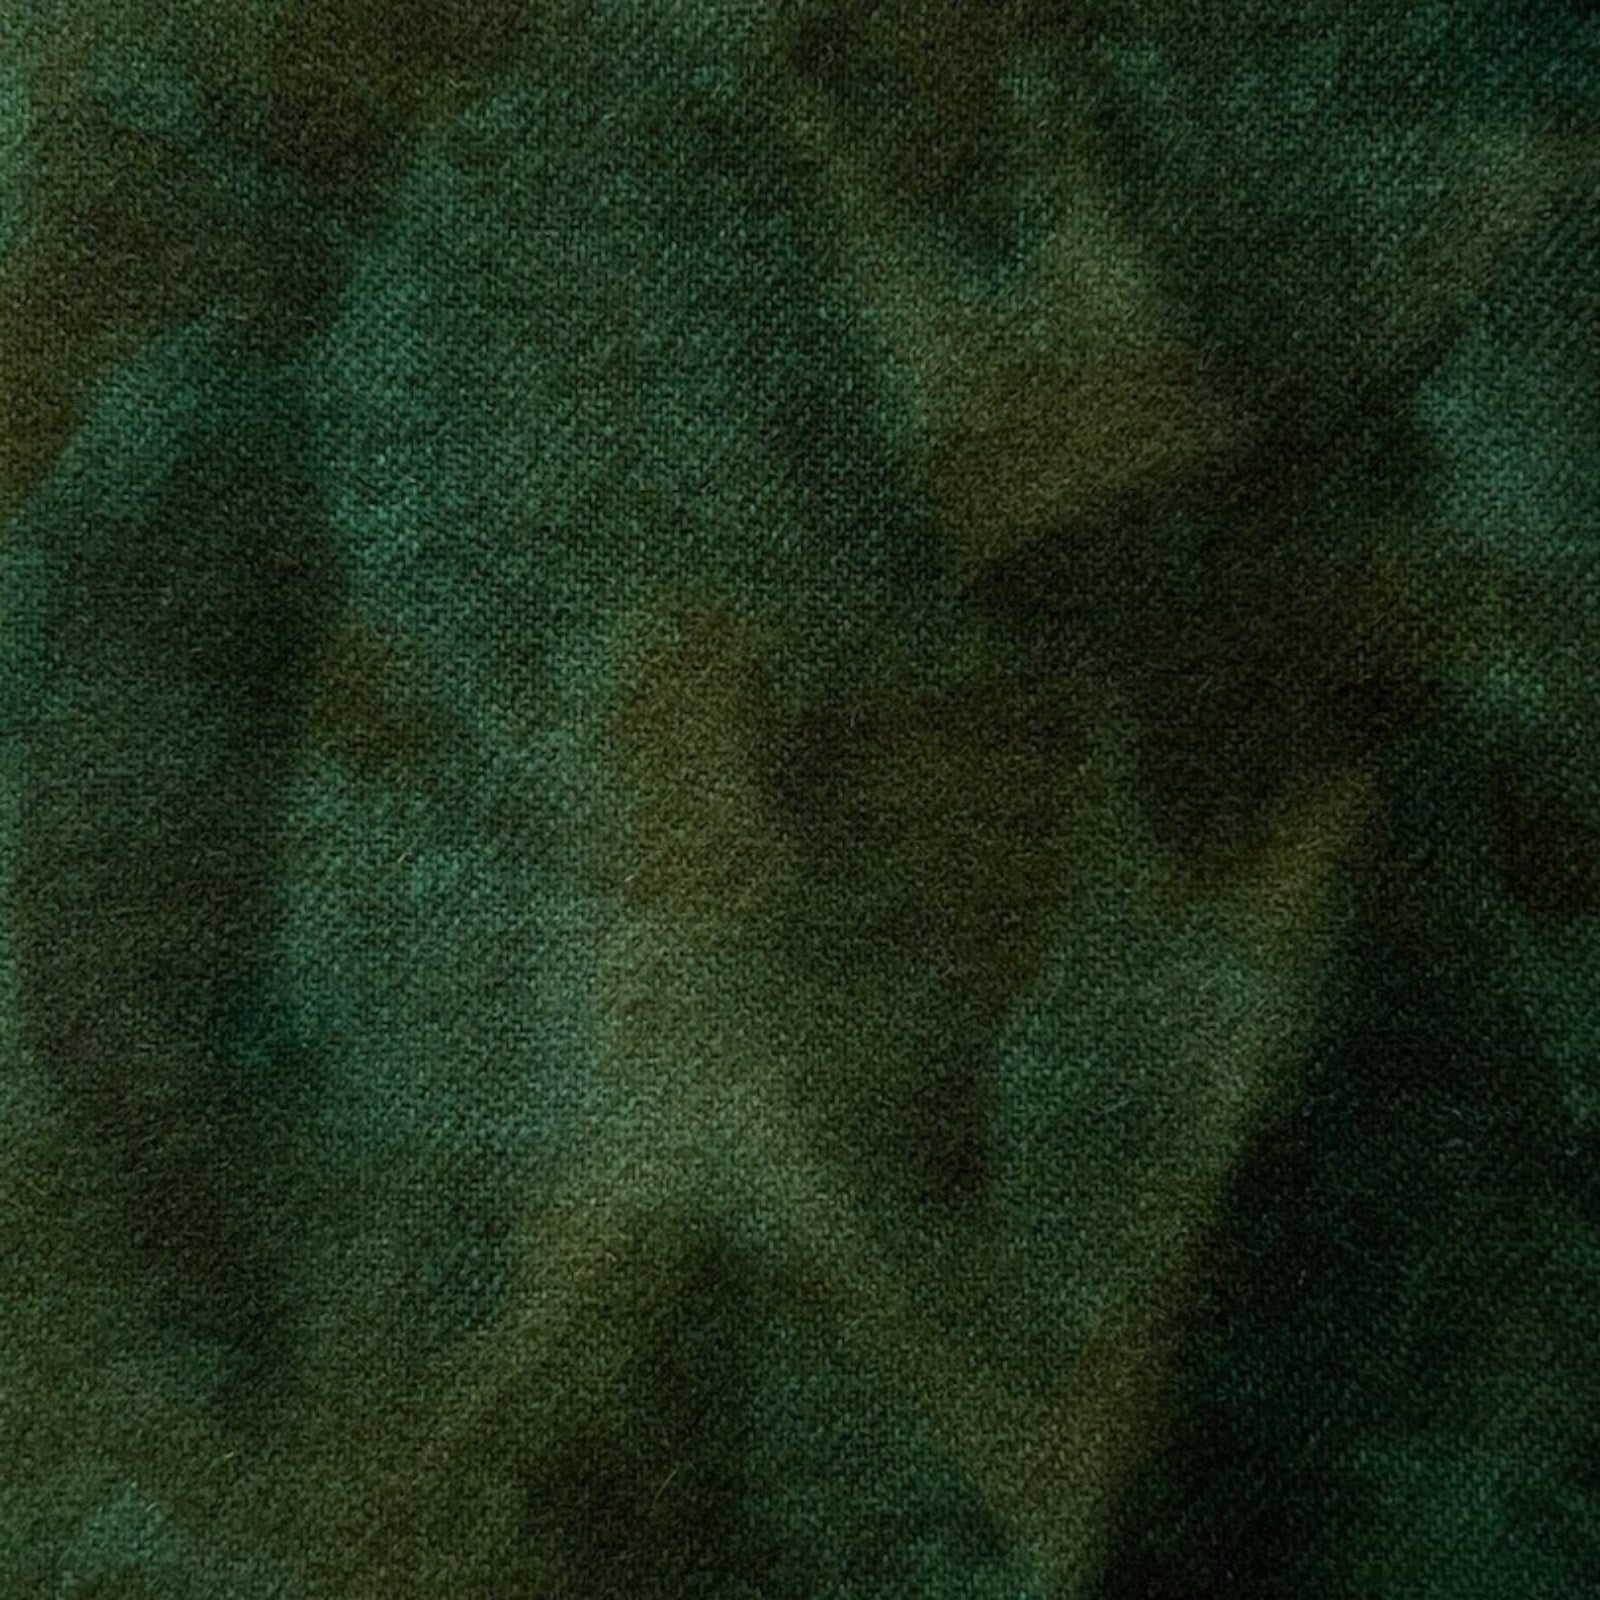 Evergreen - Colorama Hand Dyed Wool - Offered by HoneyBee Hive Rug Hooking